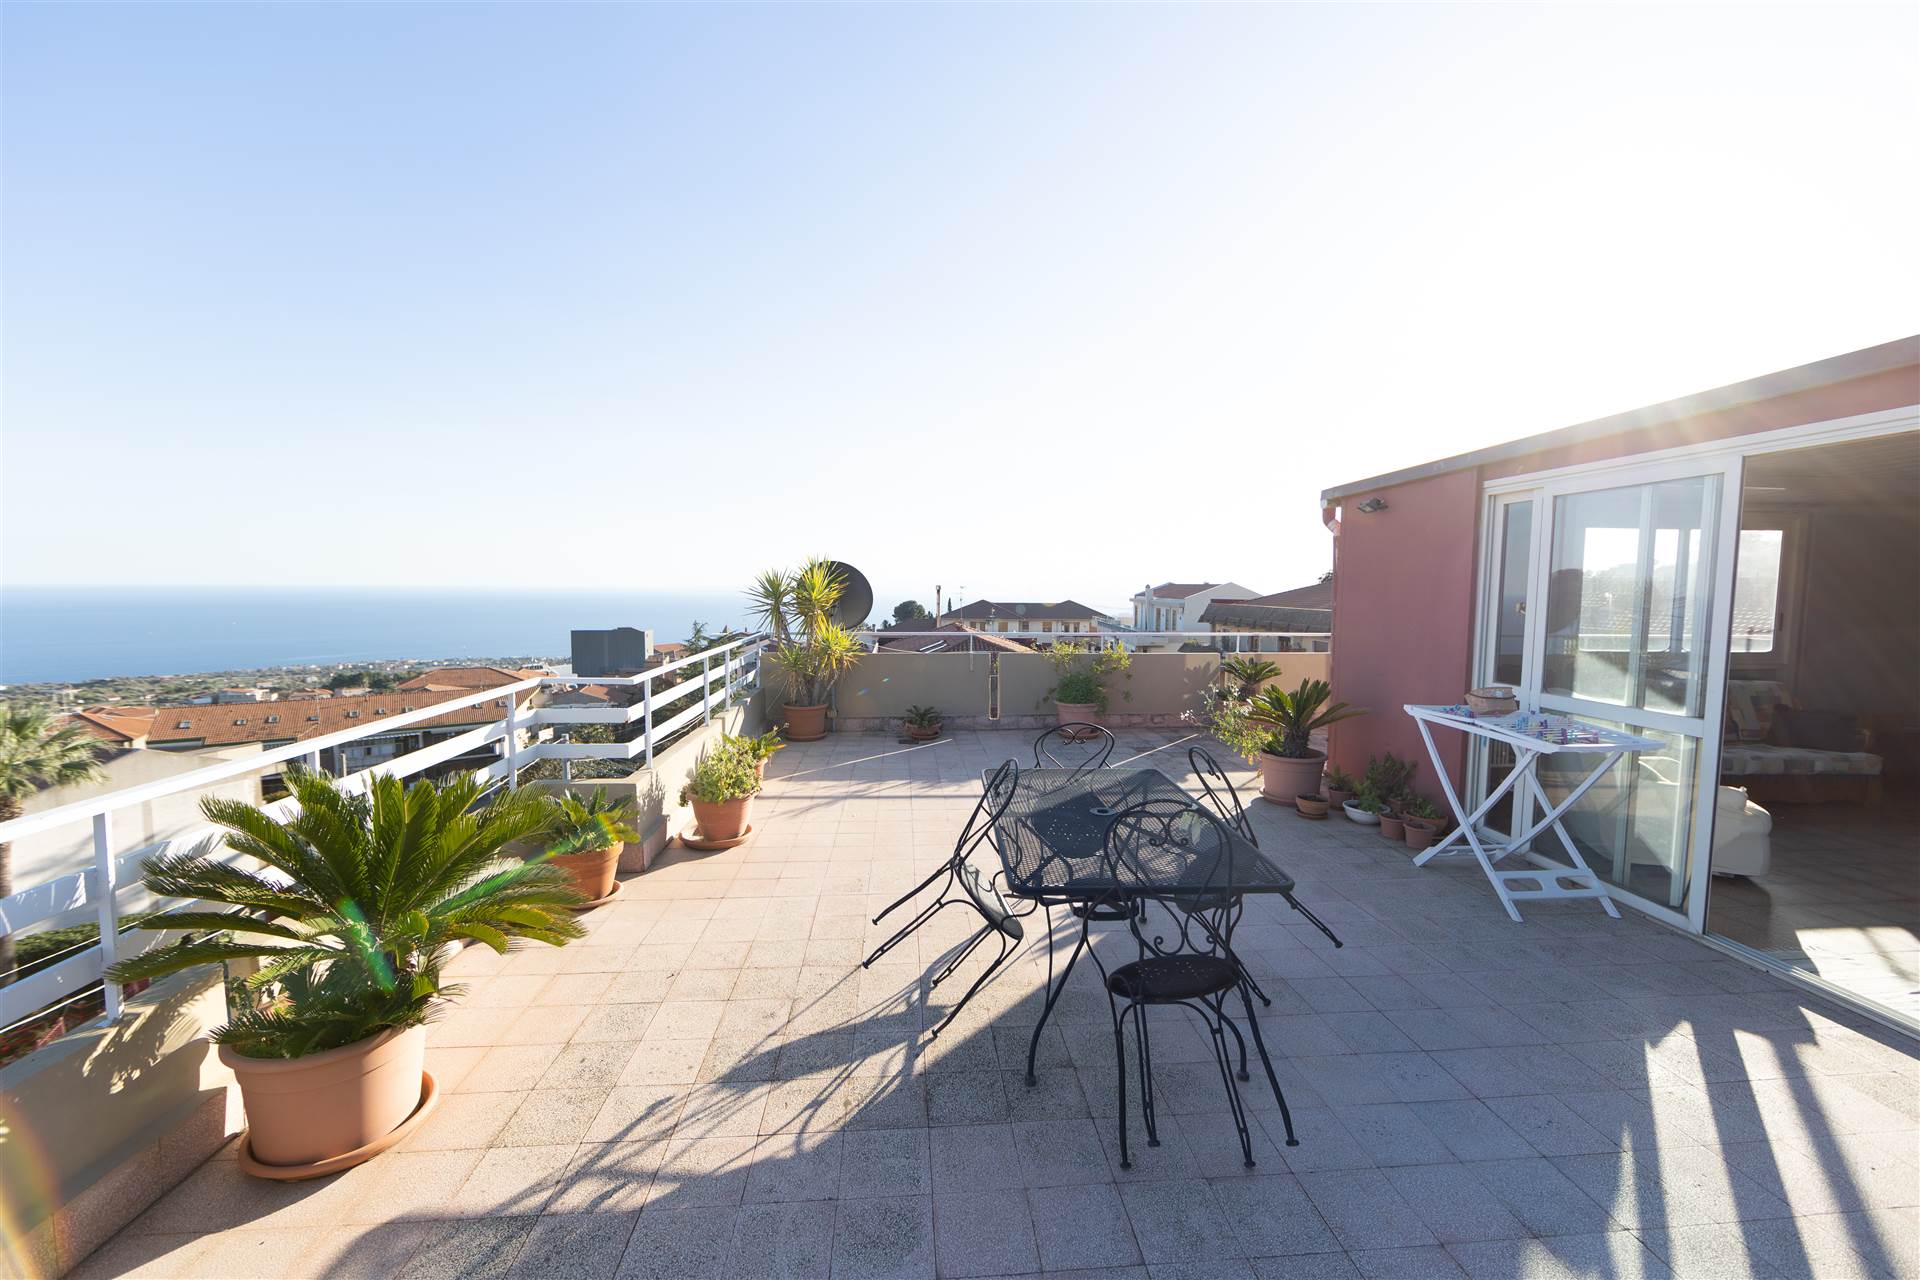 FICARAZZI, ACI CASTELLO, Apartment for sale of 100 Sq. mt., Good condition, Heating Individual heating system, Energetic class: G, placed at 2° on 3, 